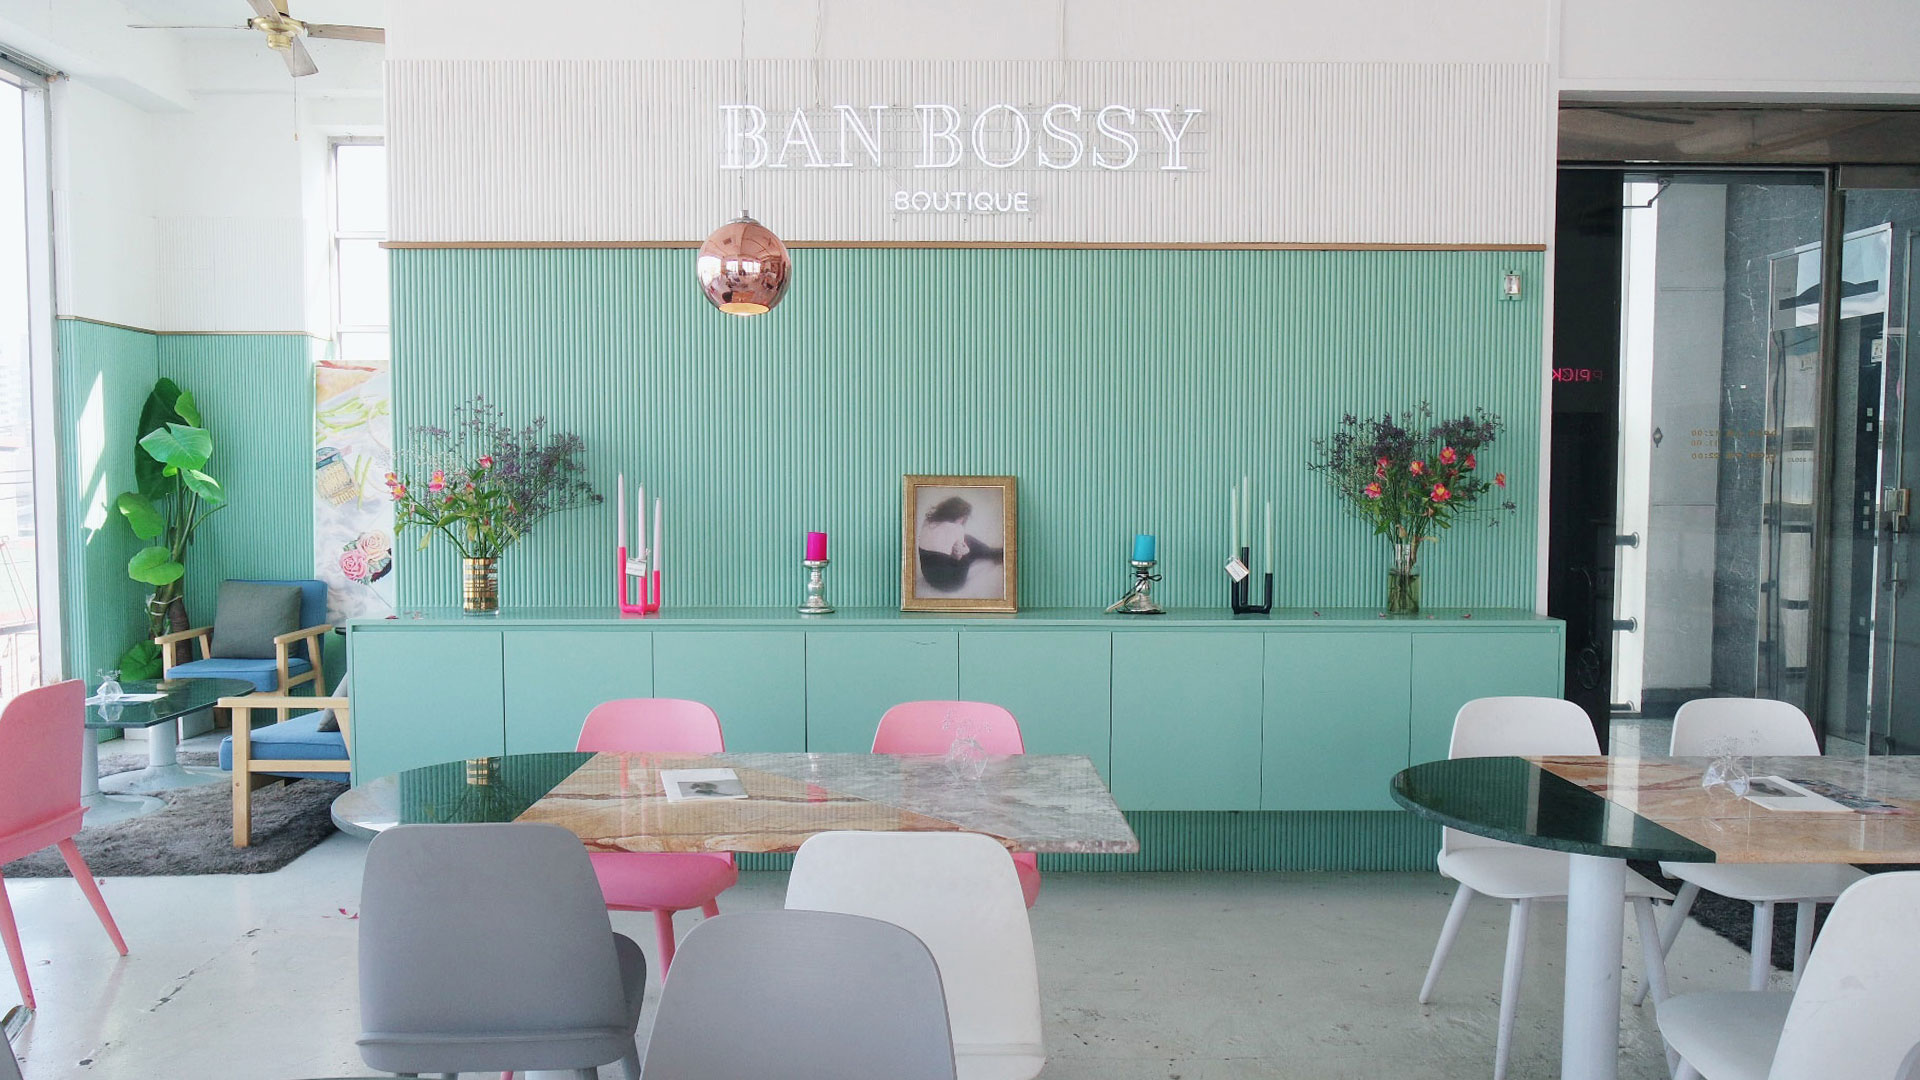 Ban Bossy Boutique